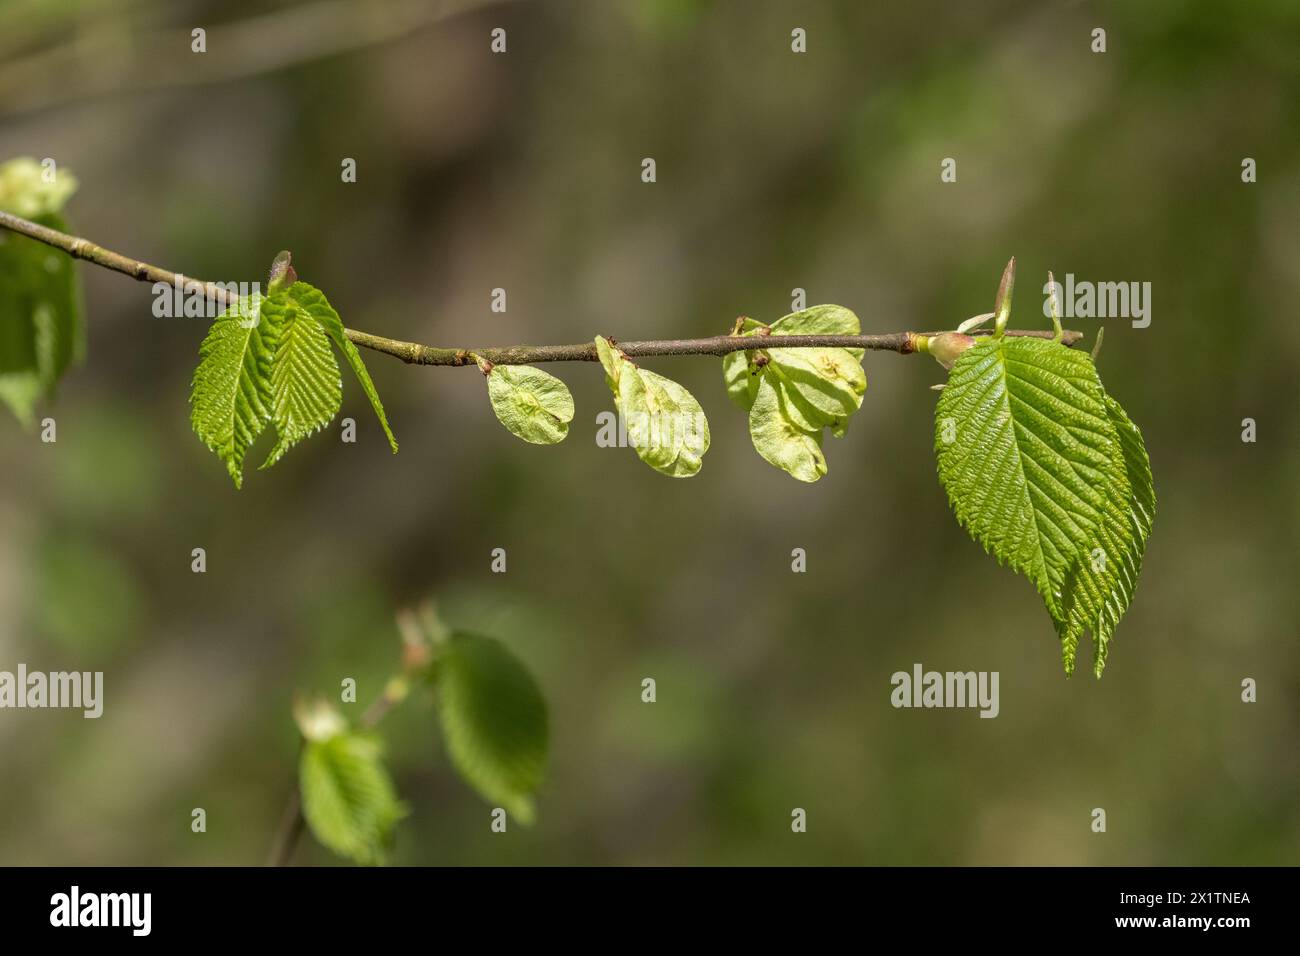 The leaves of an English Elm tree ( Ulmus procera) in Spring. The new leaves are coming out along with the wing shaped fruits, also known as samaras. Stock Photo